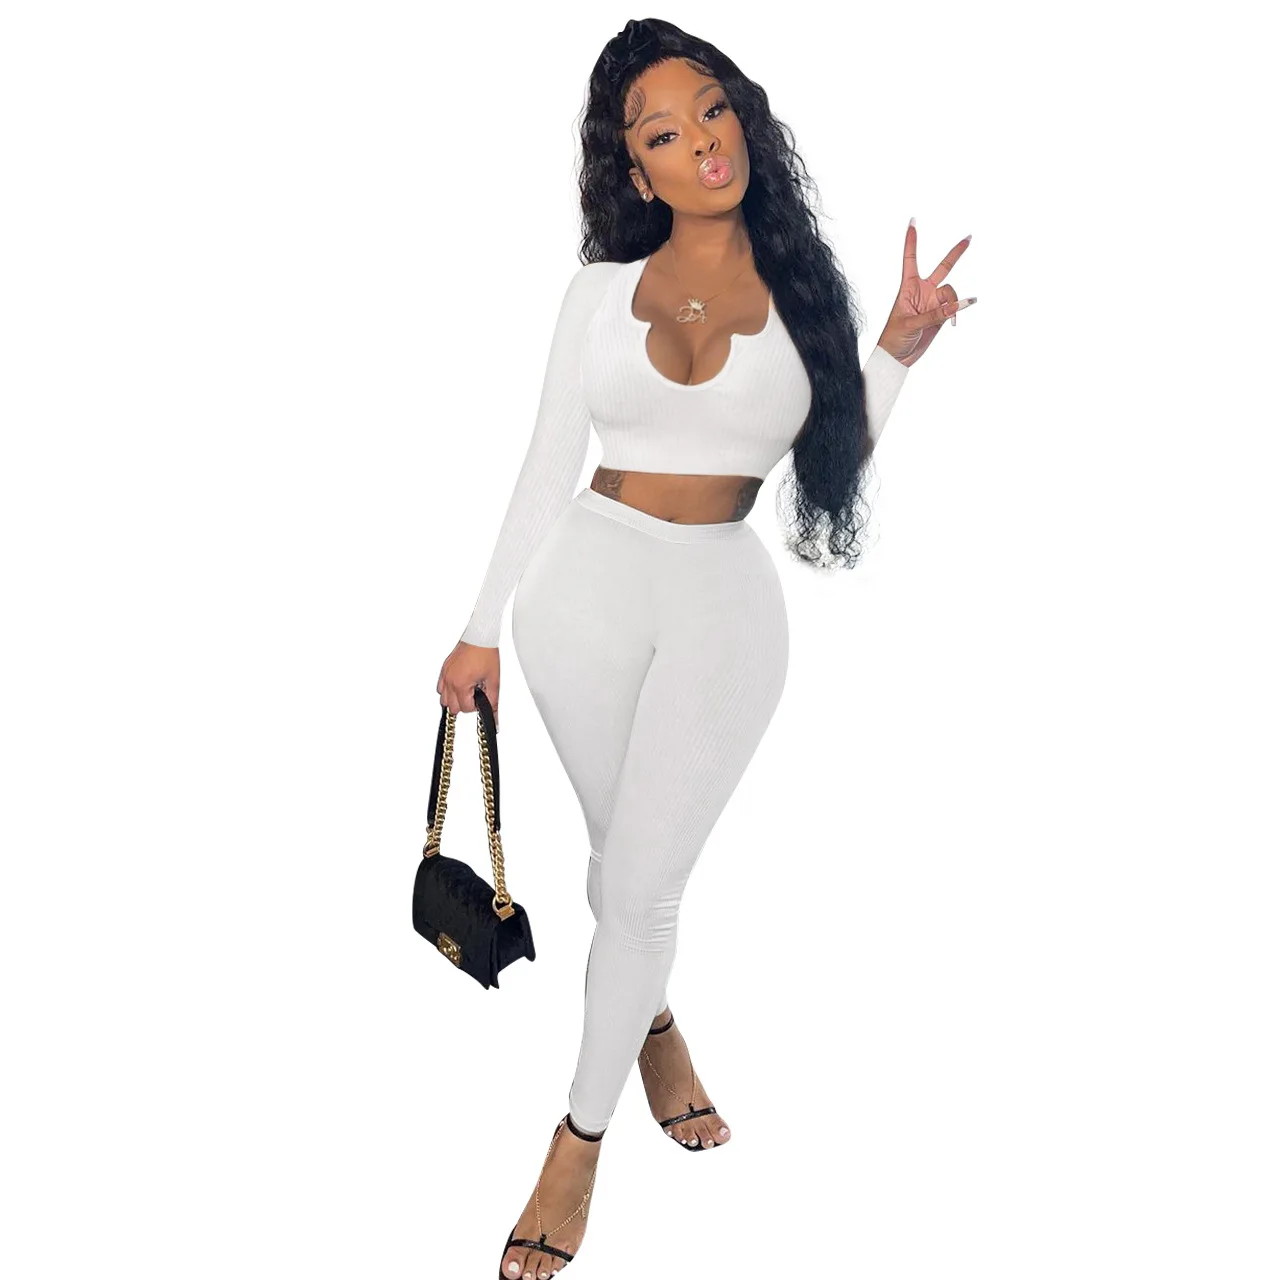 

Woman's Sportwear Outfit Bodycon Solid V-neck Crop Tops Leggings Matching 2 piece Set Female Activity Fitness Wear Tracksuits